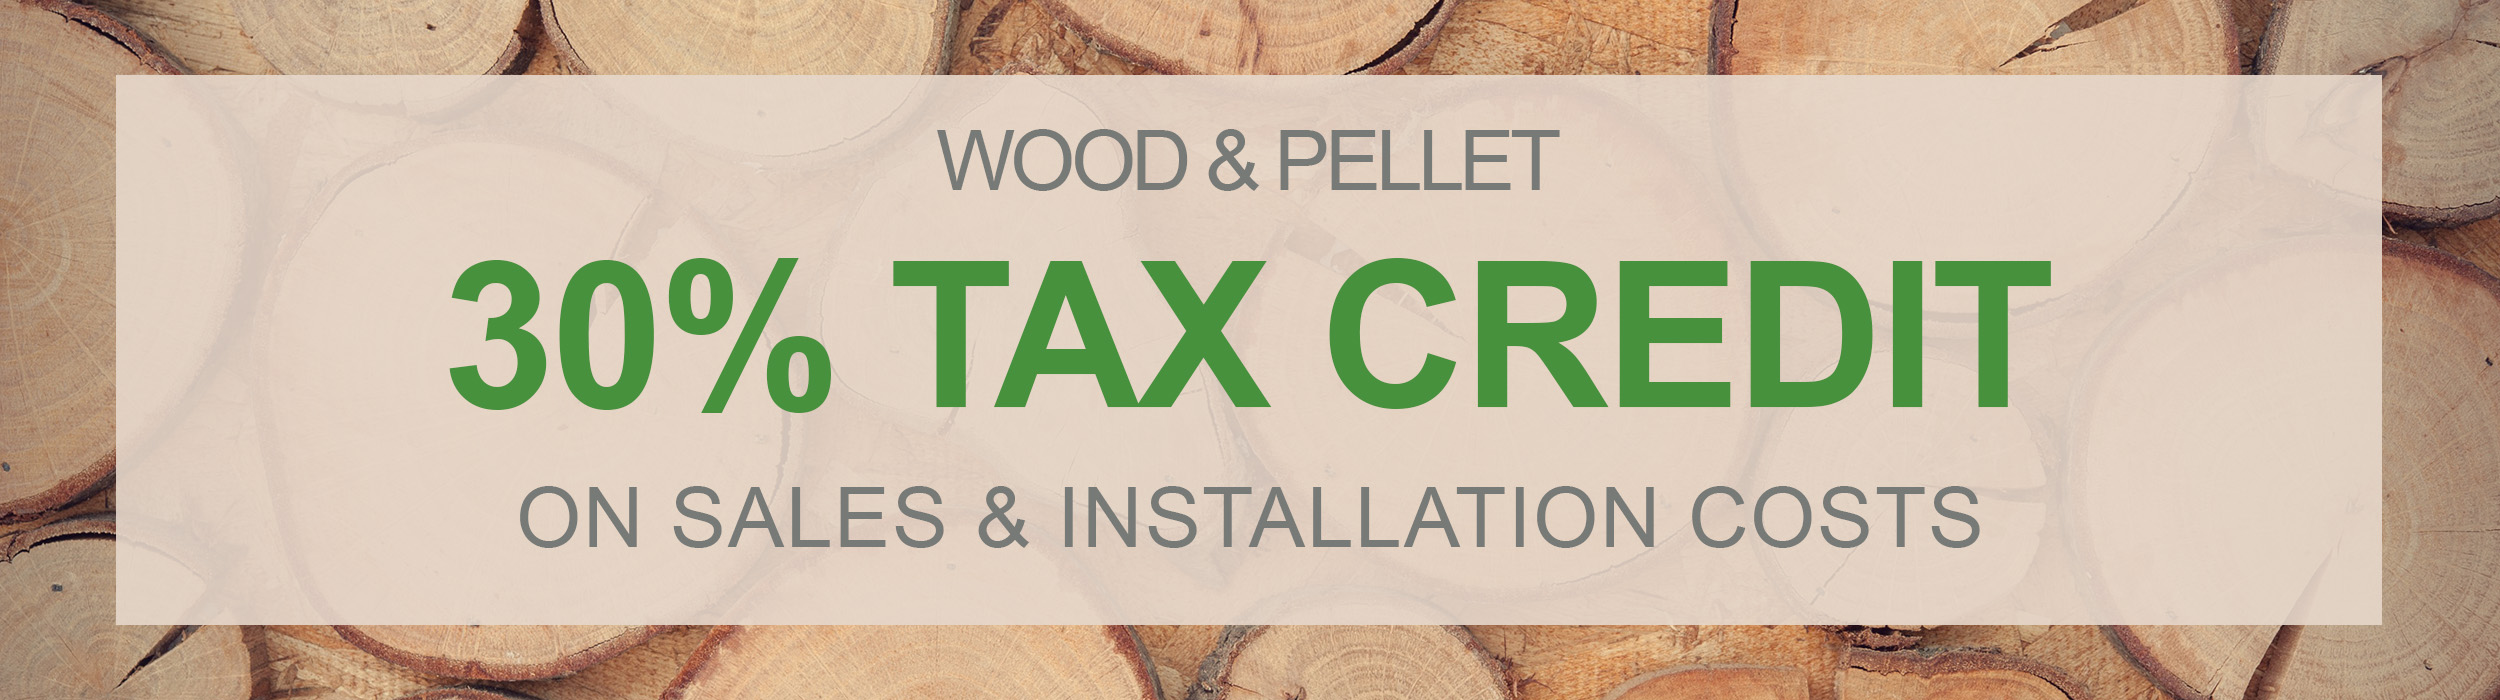 wood and pellet federal tax credit. save 30% (up to $2,000 annually) on purchase and installation of select units